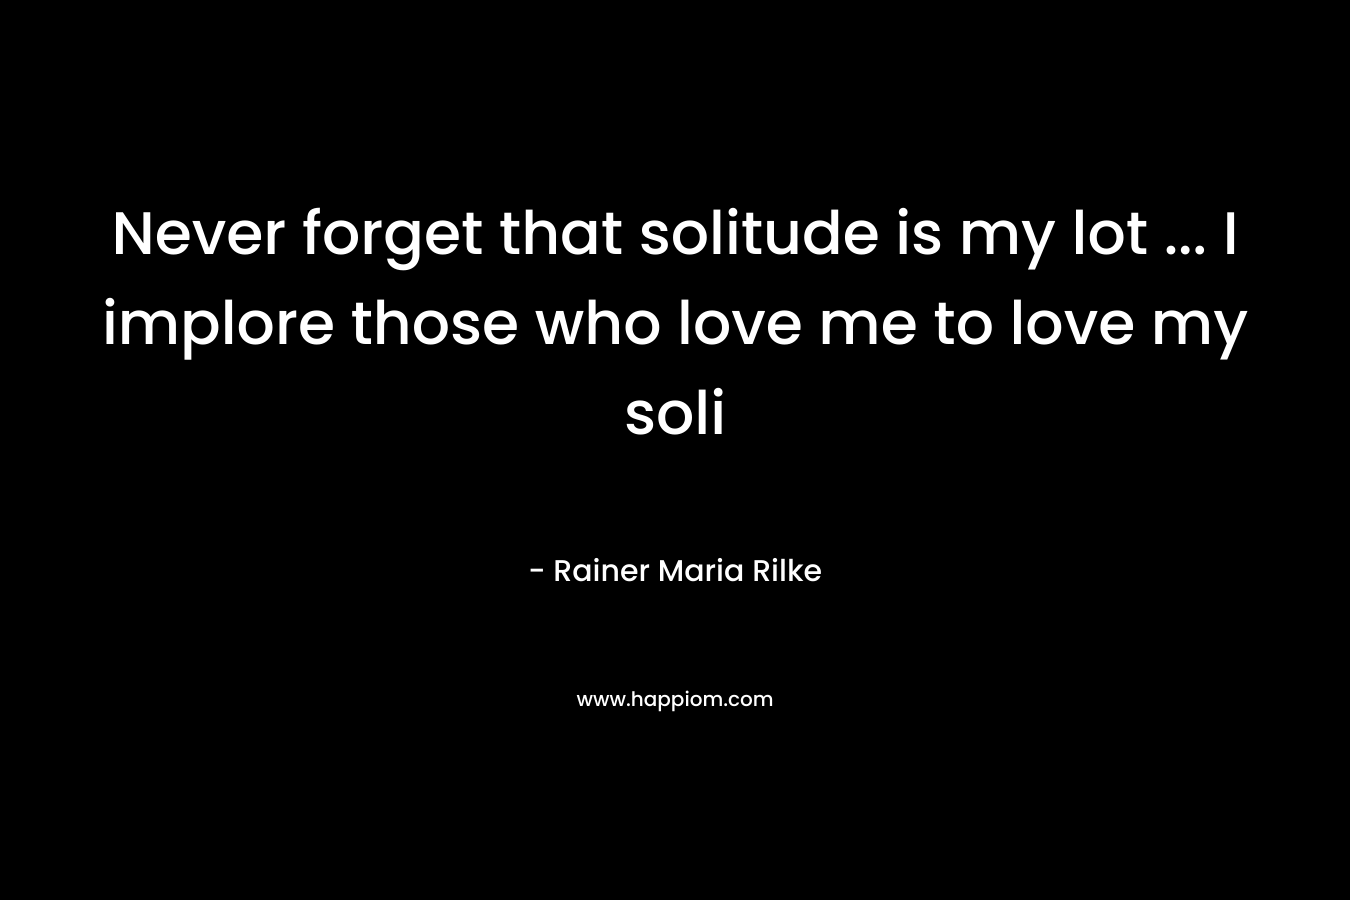 Never forget that solitude is my lot ... I implore those who love me to love my soli